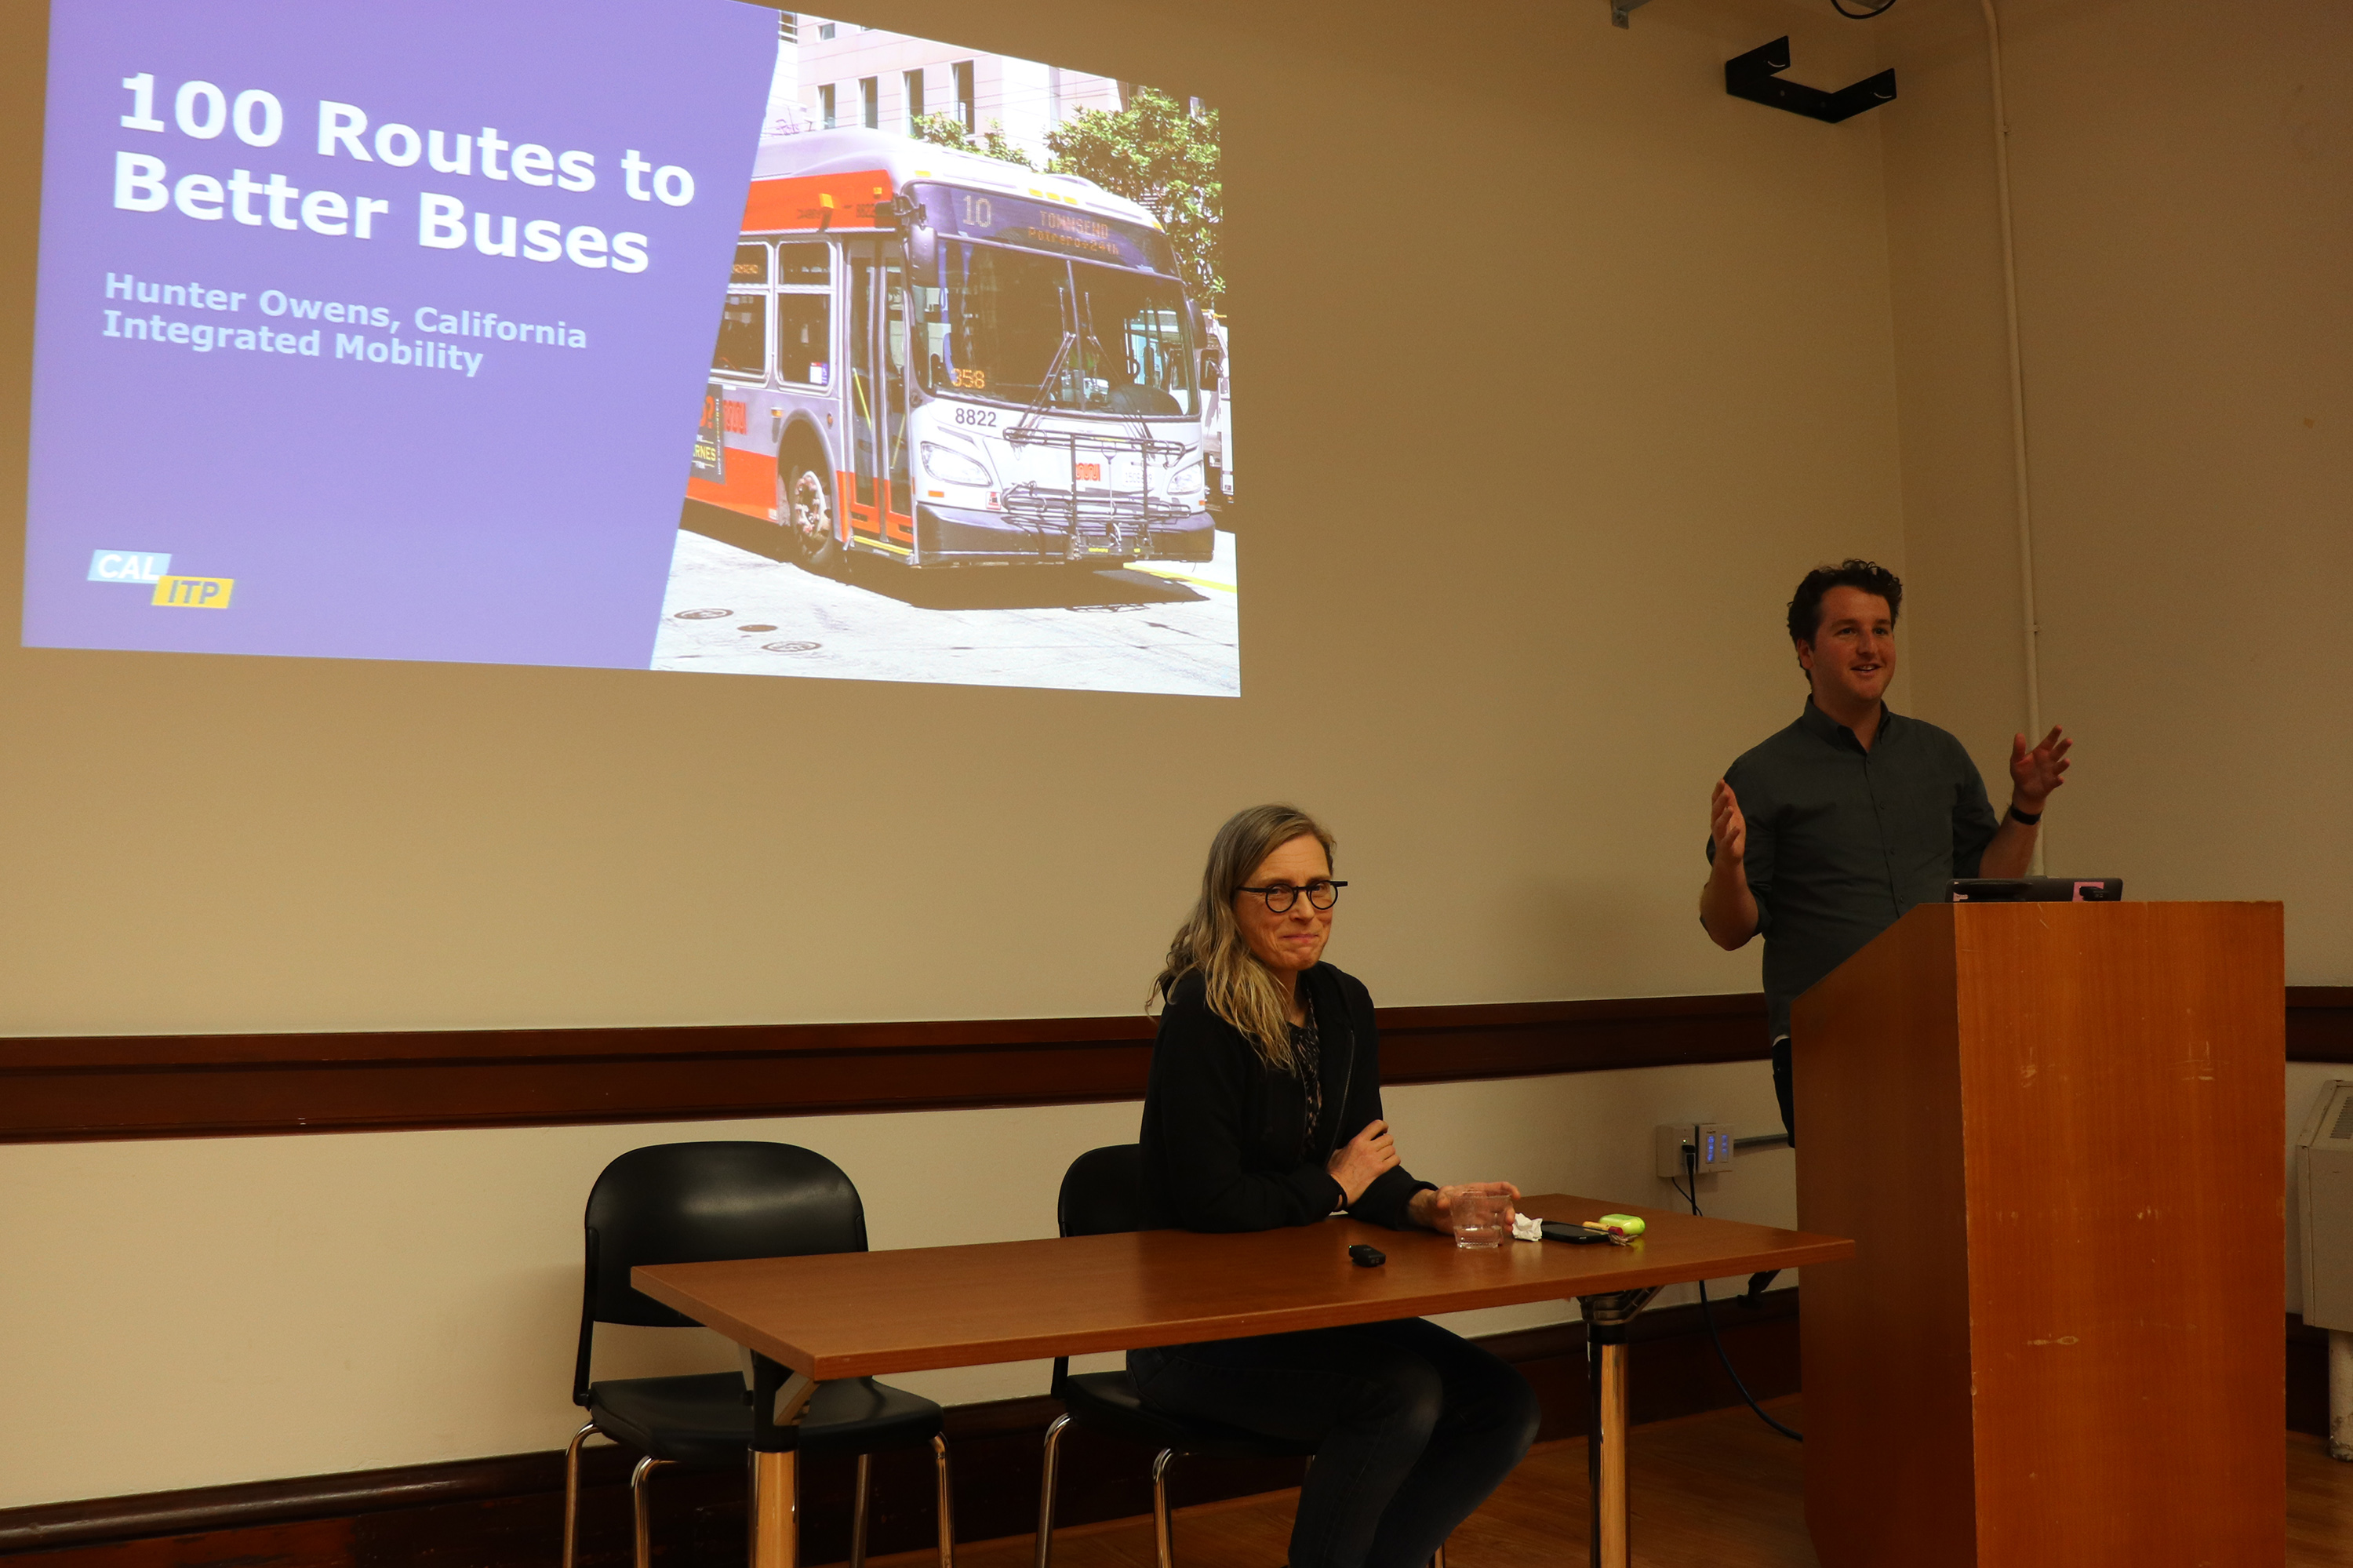 Caltrans CA Integrated Mobility Program Manager Gillian Gillett and Research Data Manager Hunter Owens presented Crossing Modes: Bringing Data, Standardization and Performance Metrics to Transit Agencies & Caltrans at the ITS Seminar on March 3, 2023.